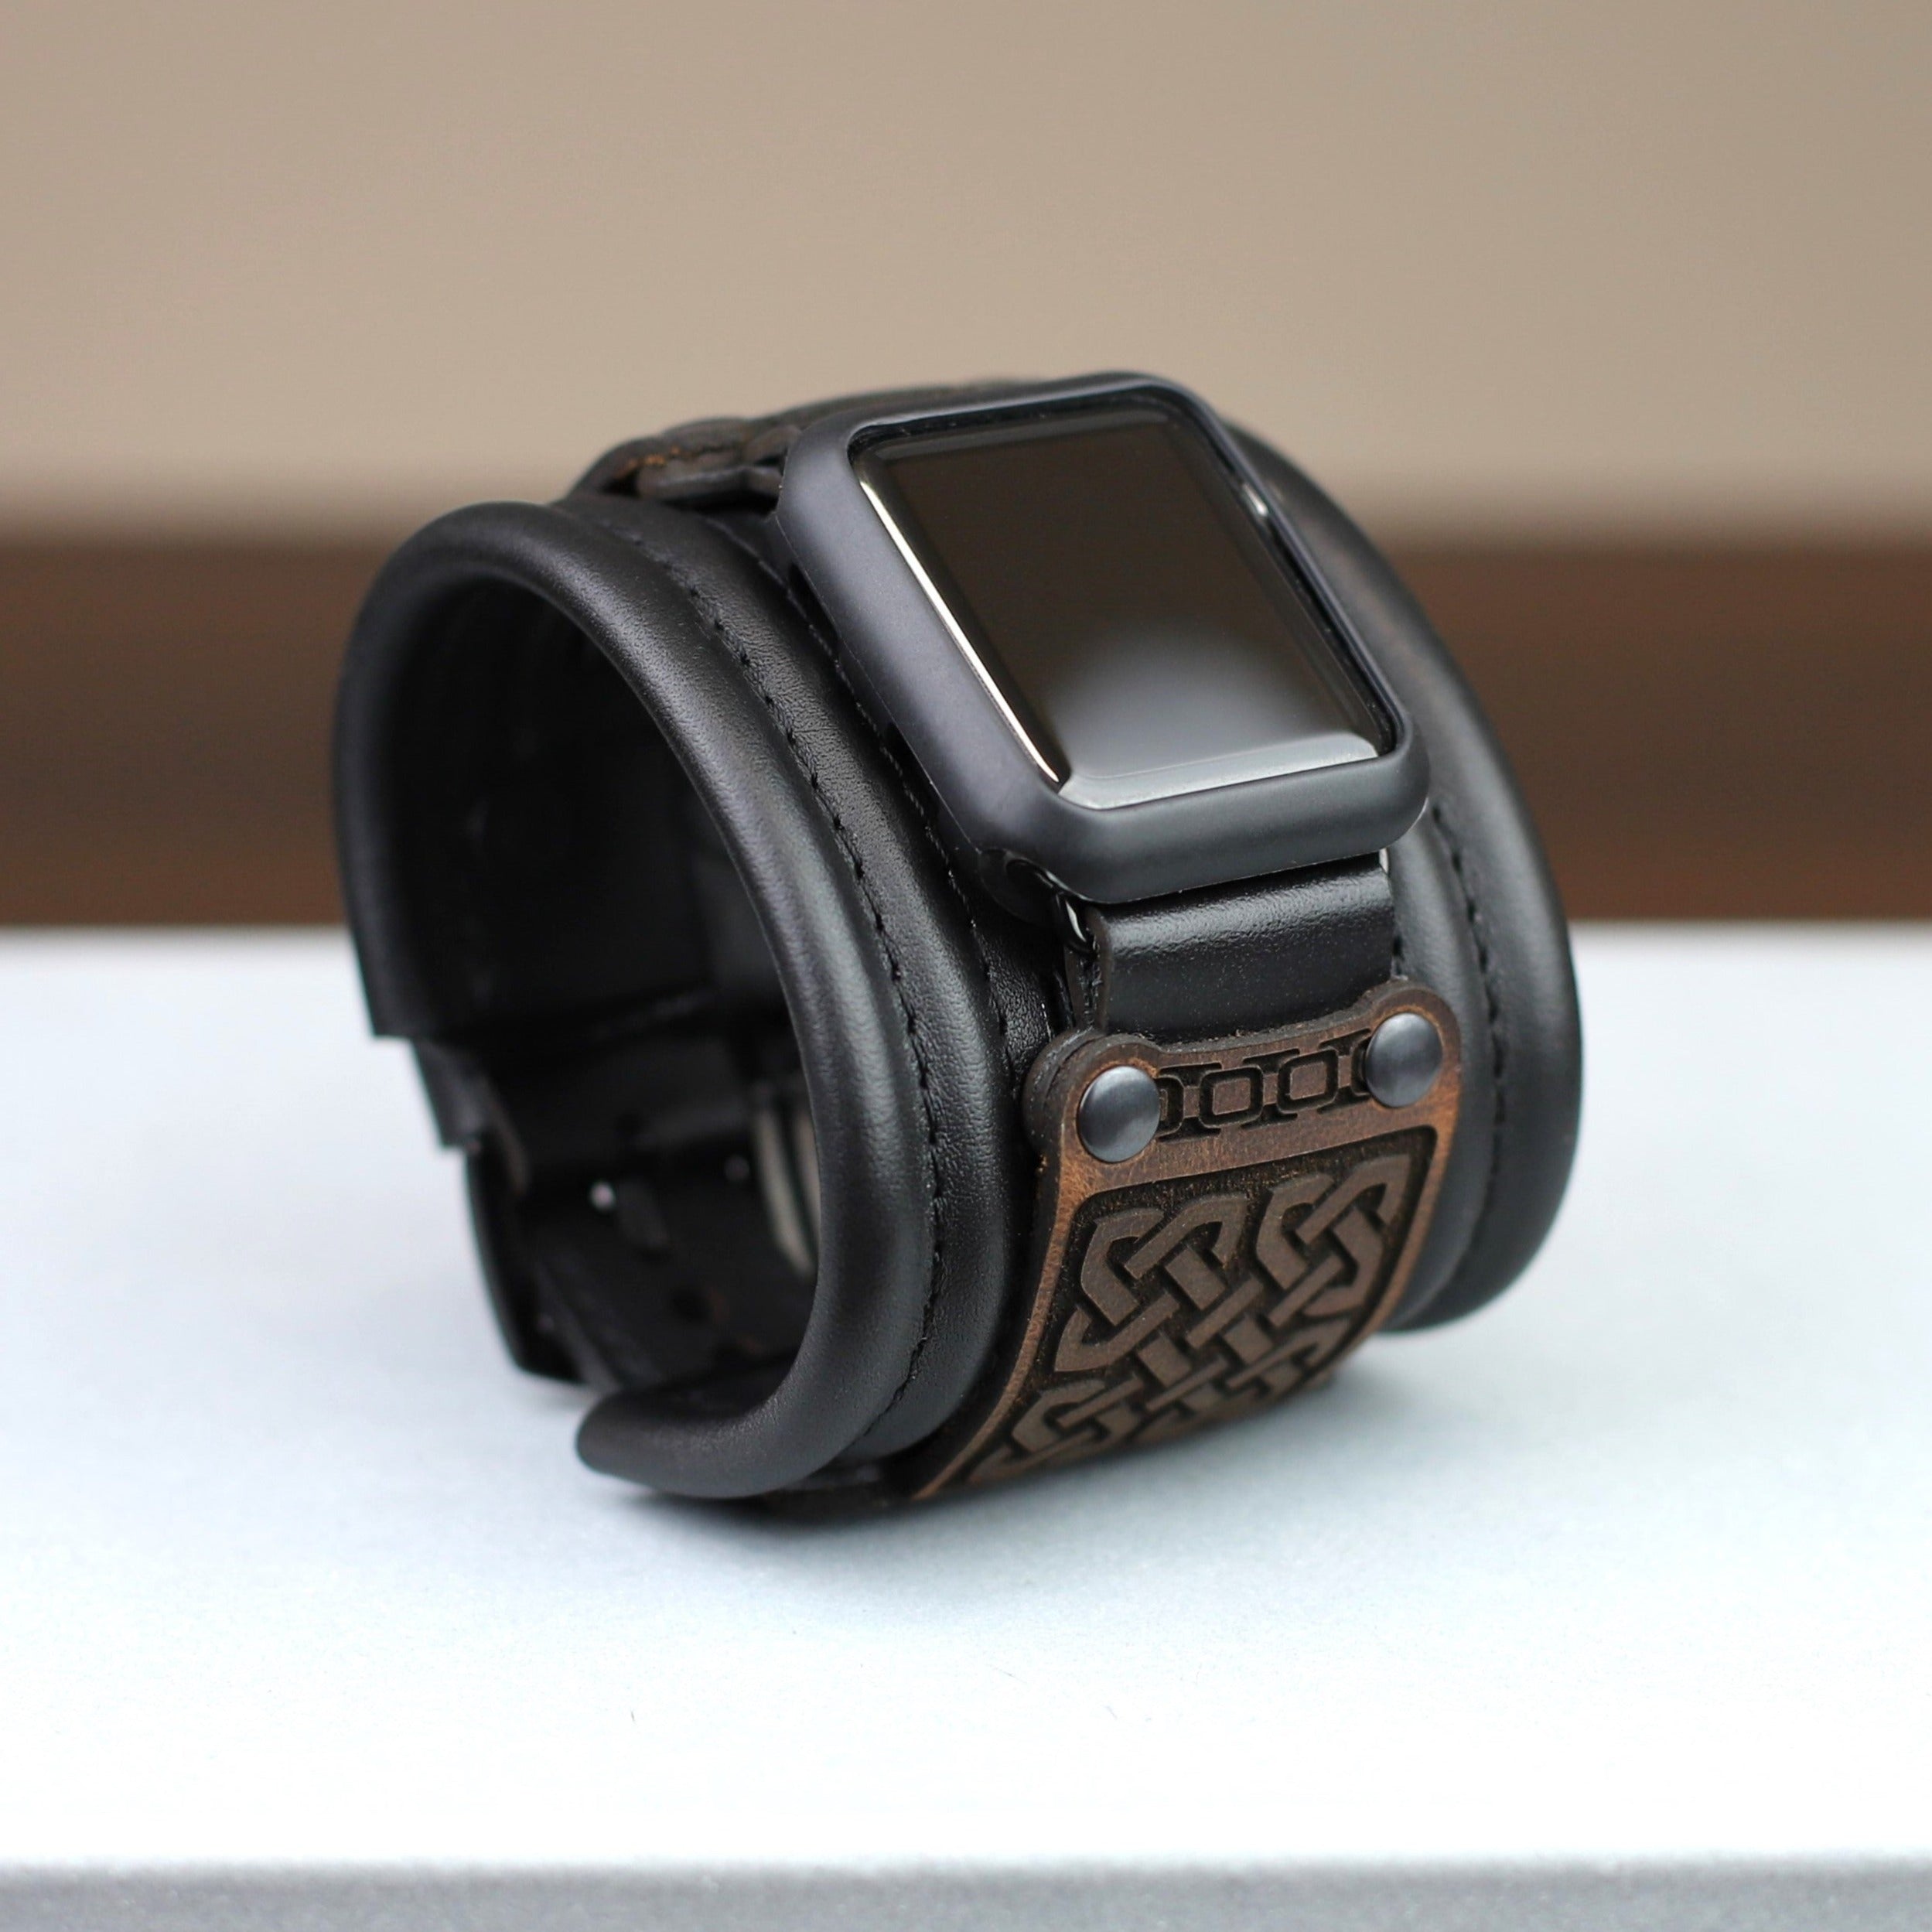 Leather Strap for Samsung Galaxy Watch, Apple Watch